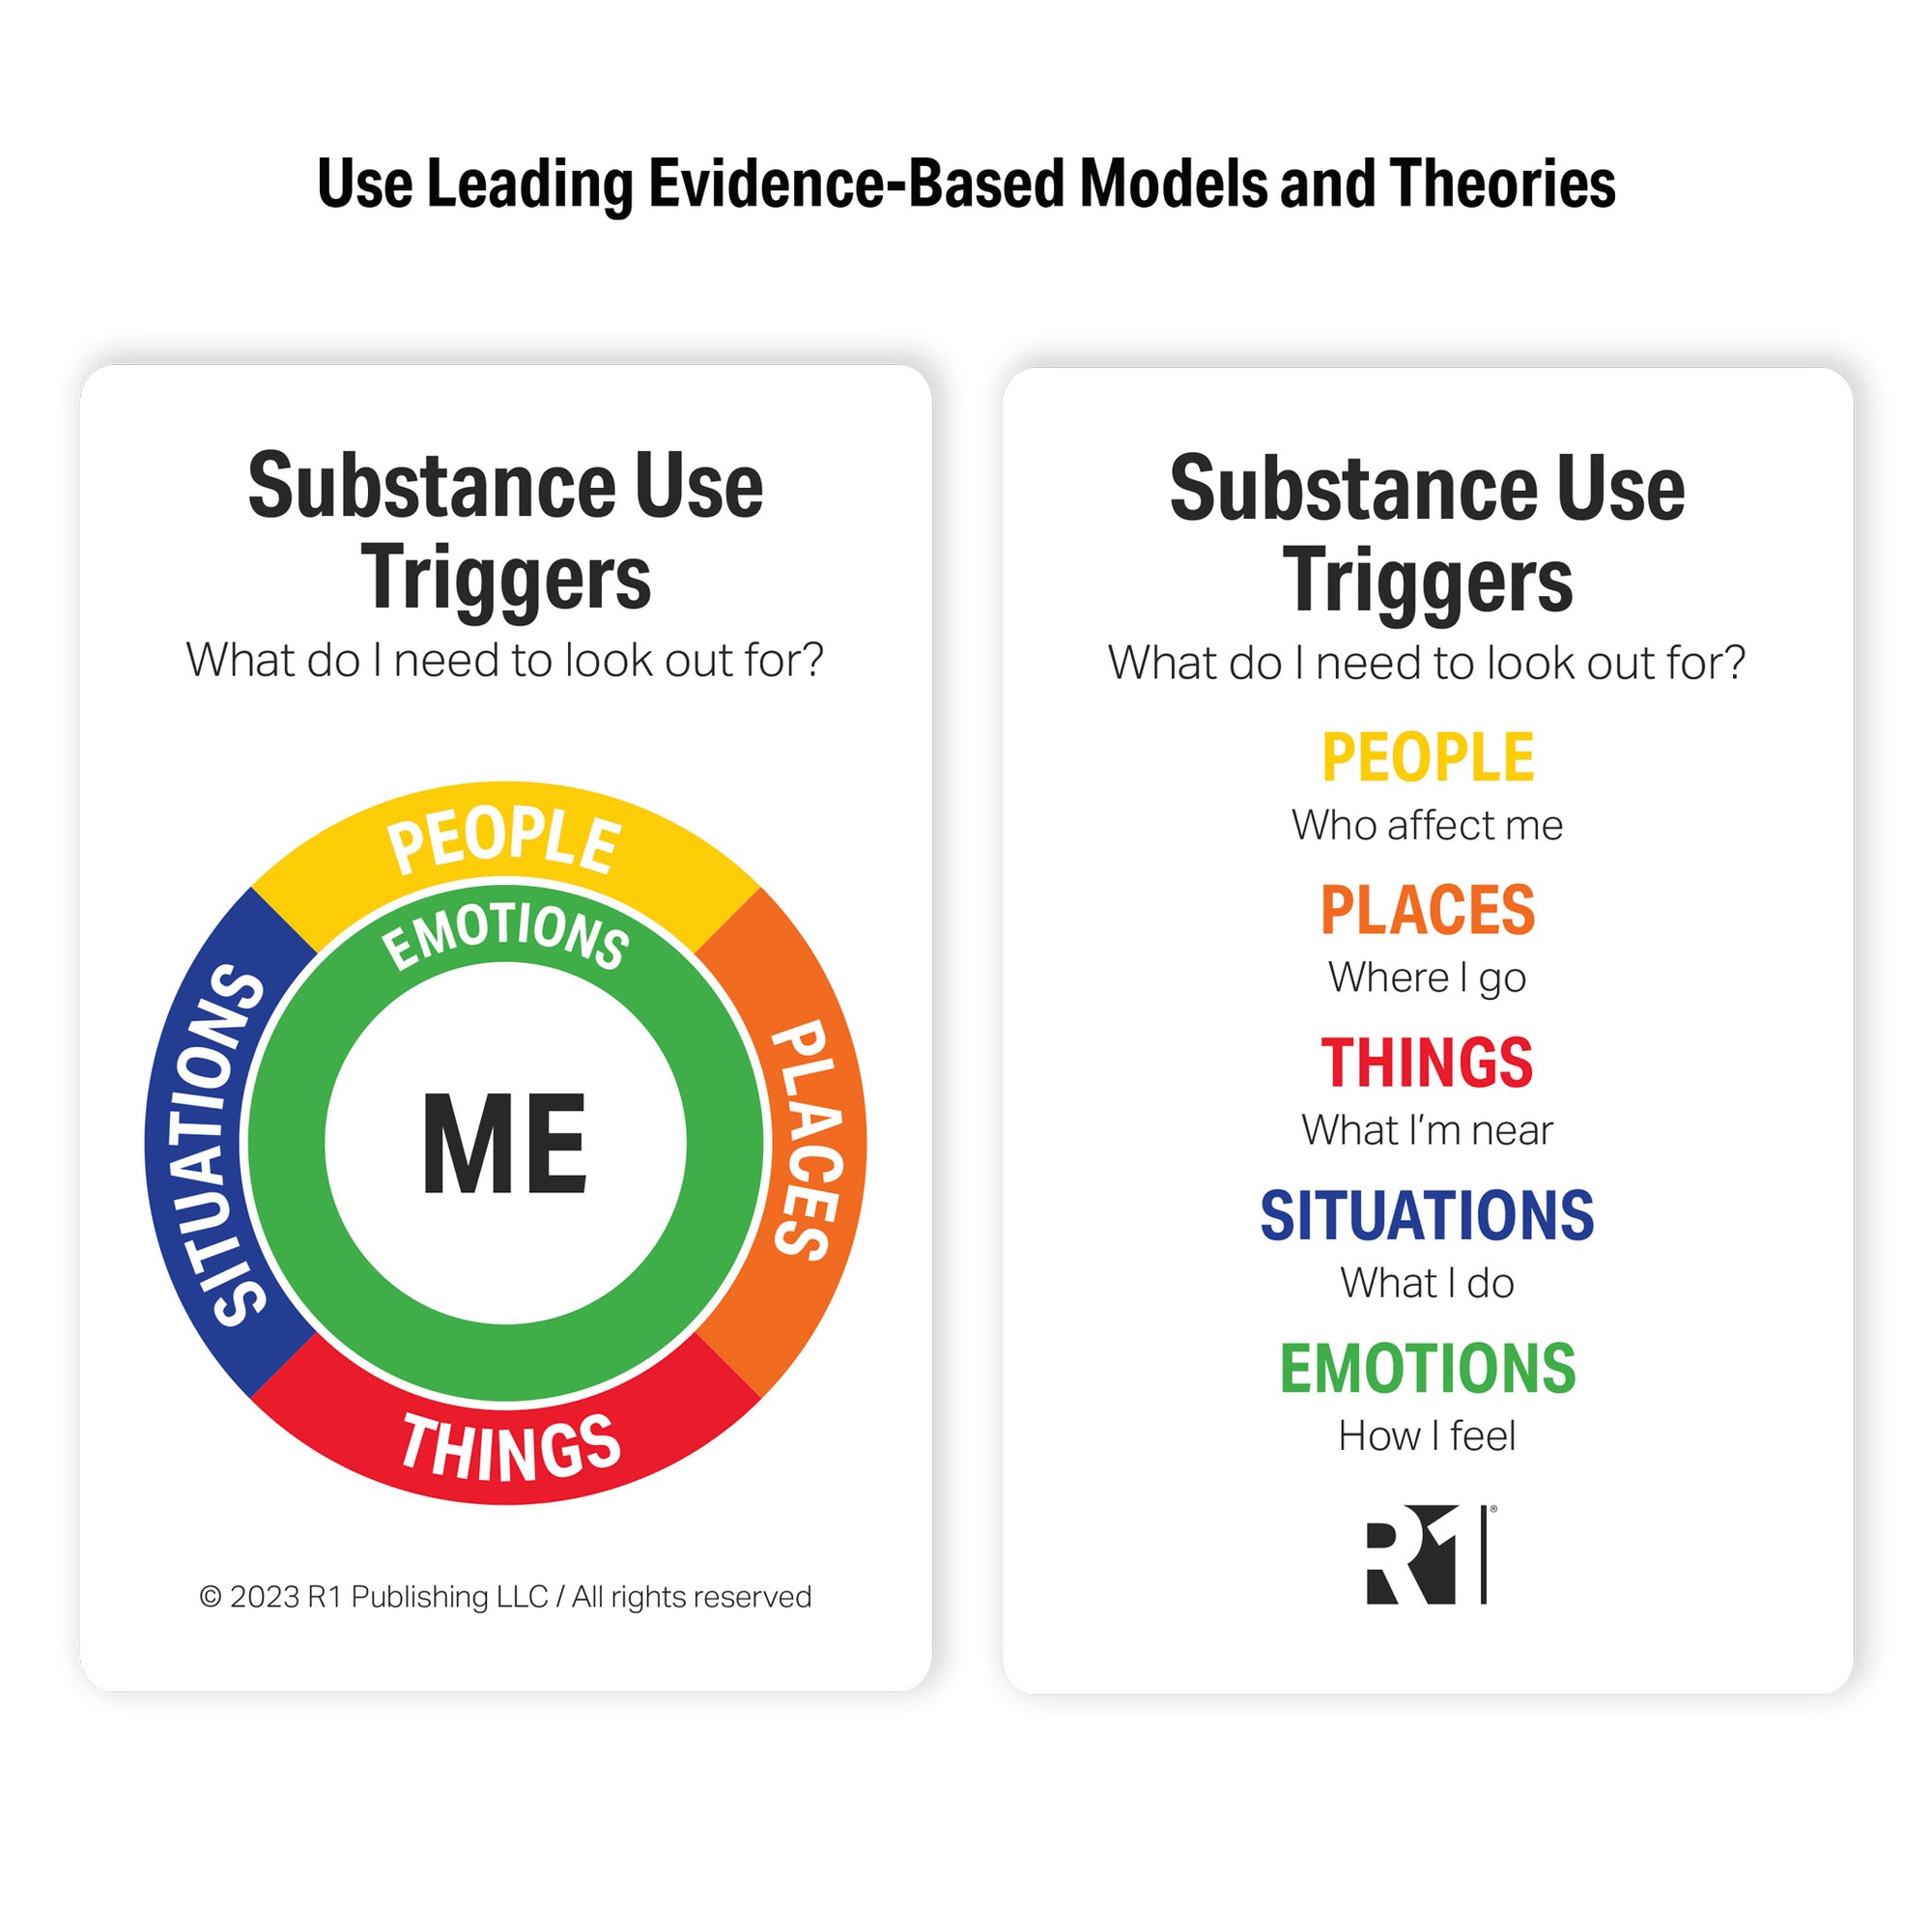 Substance Use (Relapse) Triggers Facilitator Guide